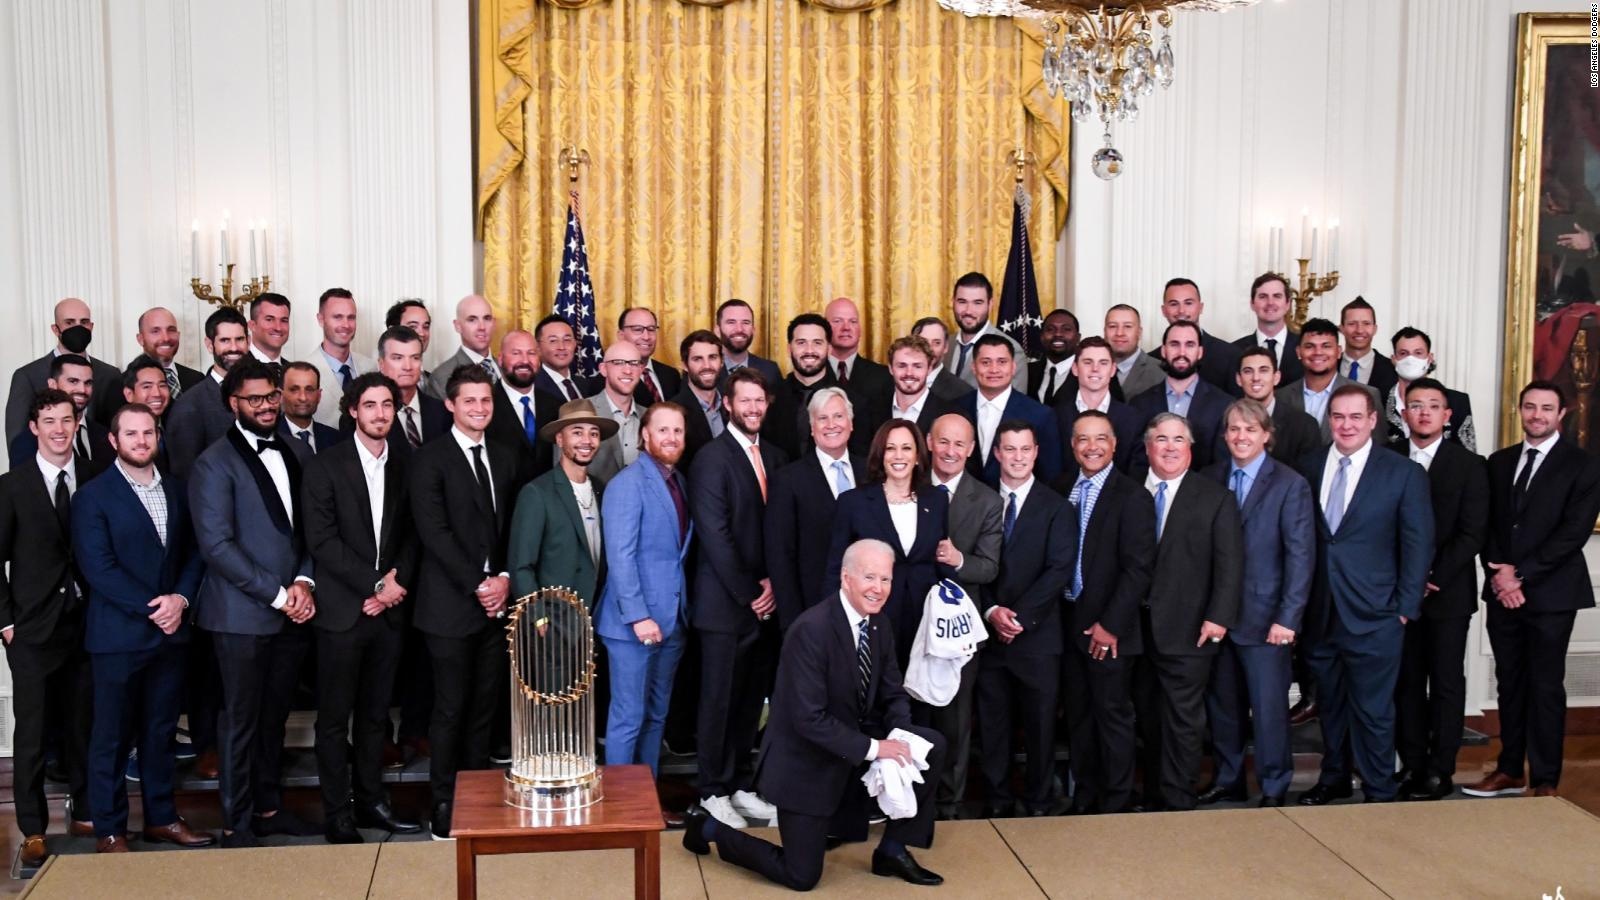 1625485298 Recognition of the Dodgers in the White House Video